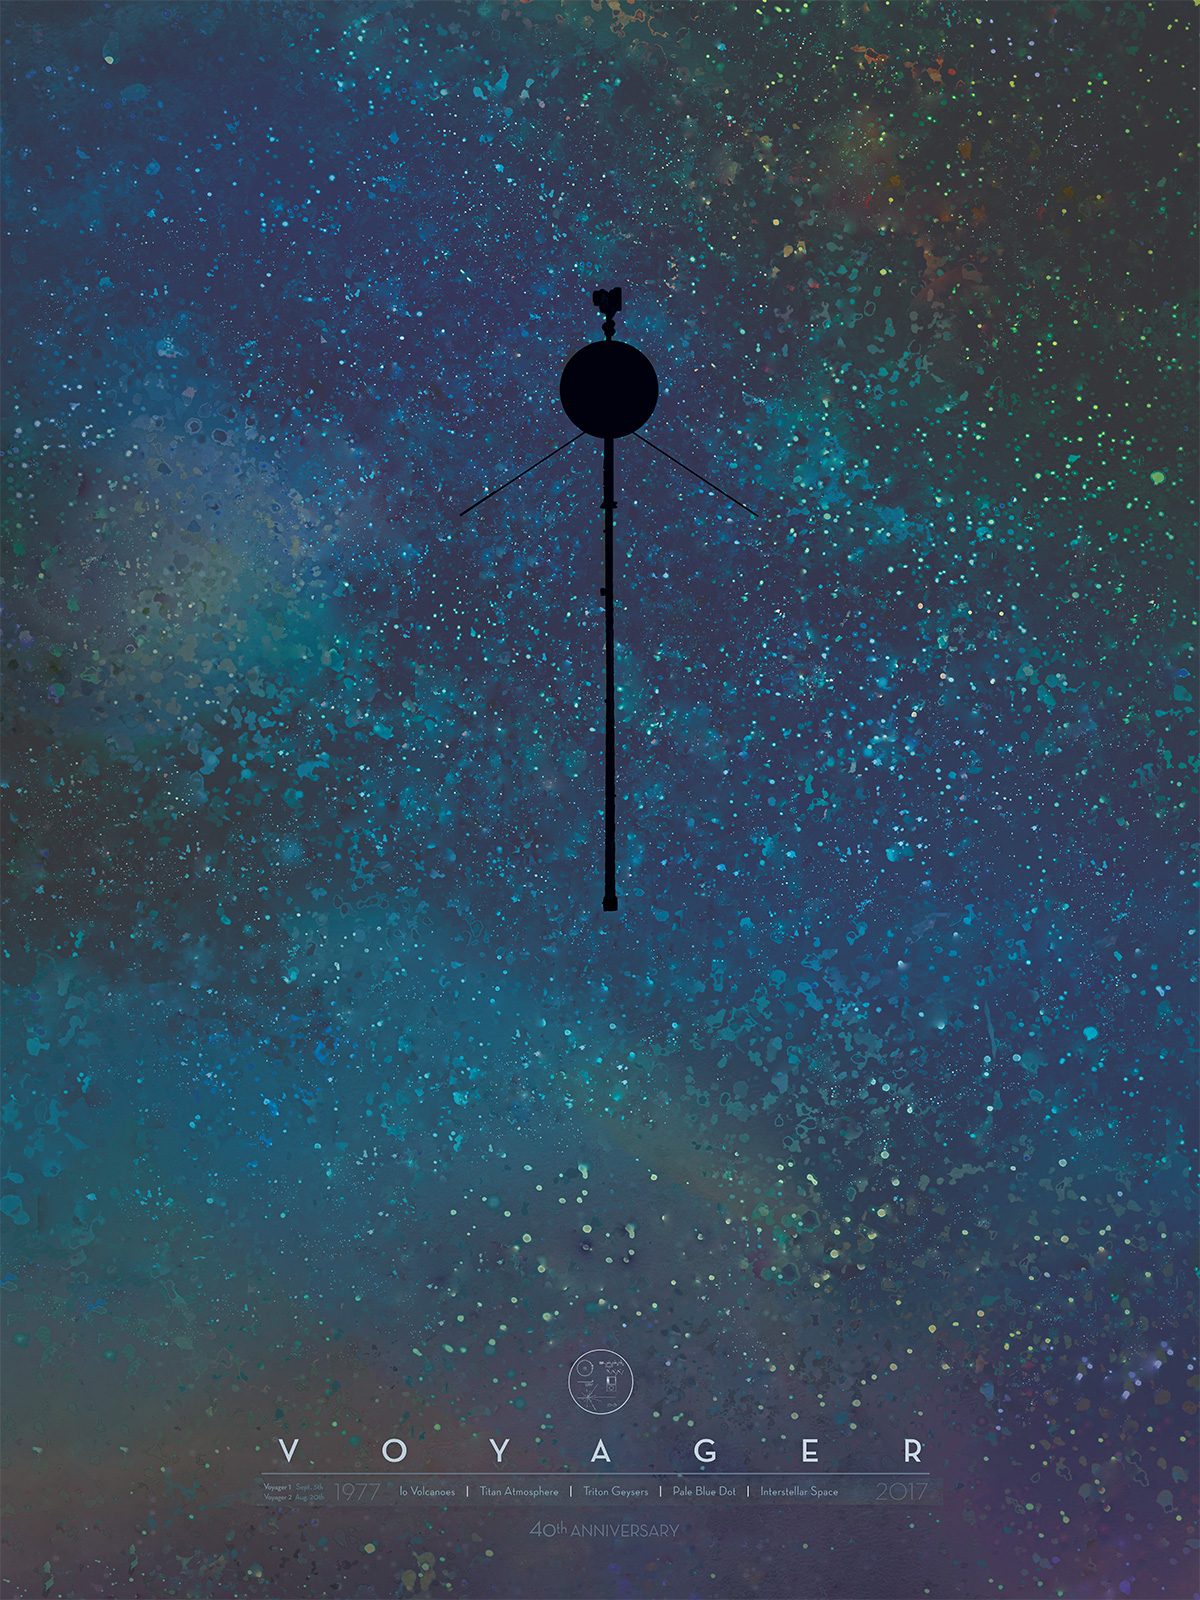 A Voyager spacecraft is shown in silhouette against a background of infinite stars.